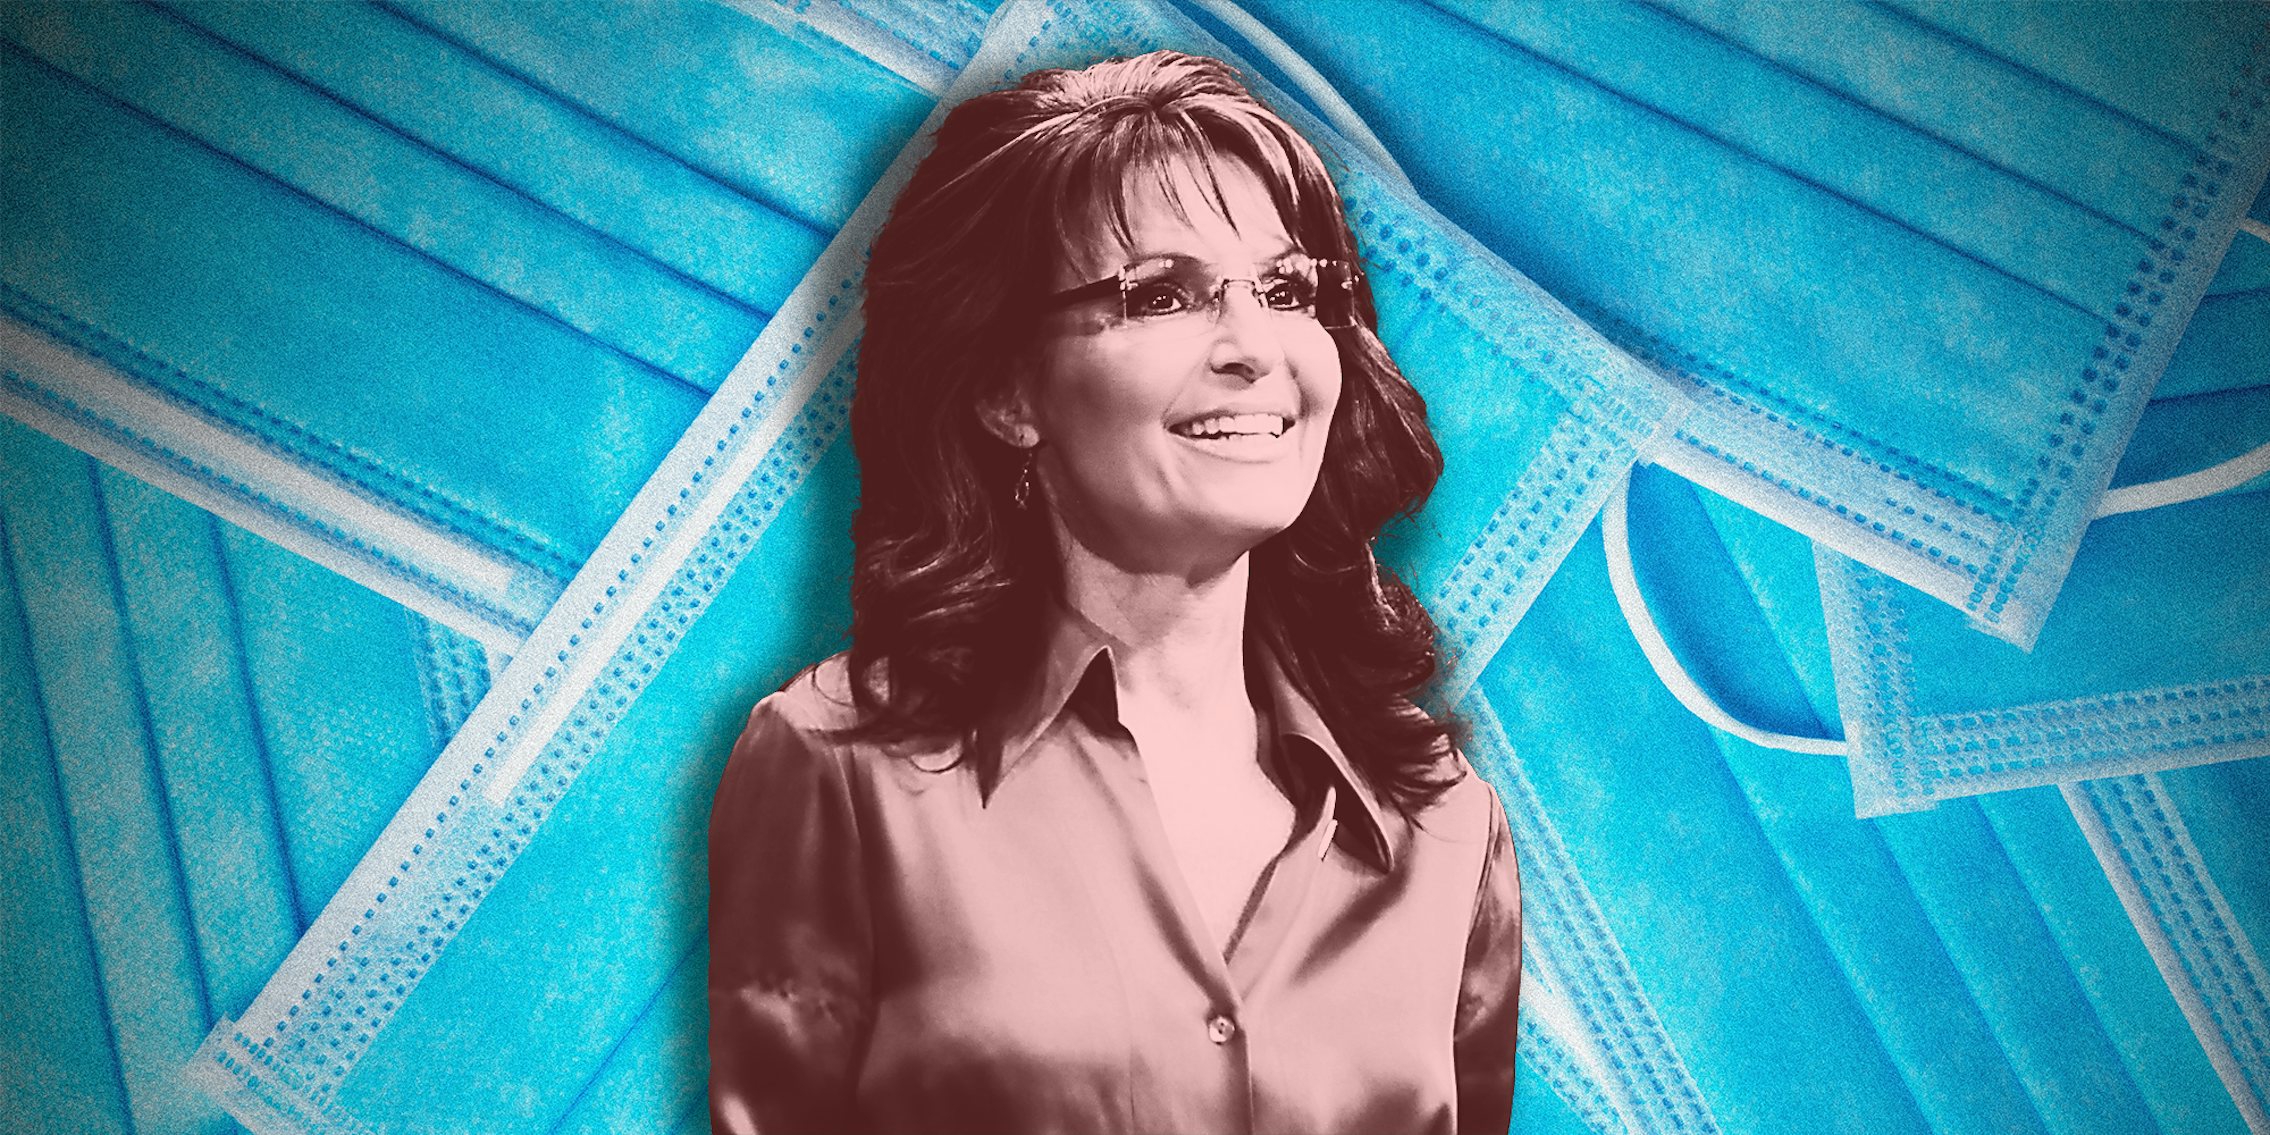 Sarah Palin on a background of face masks.